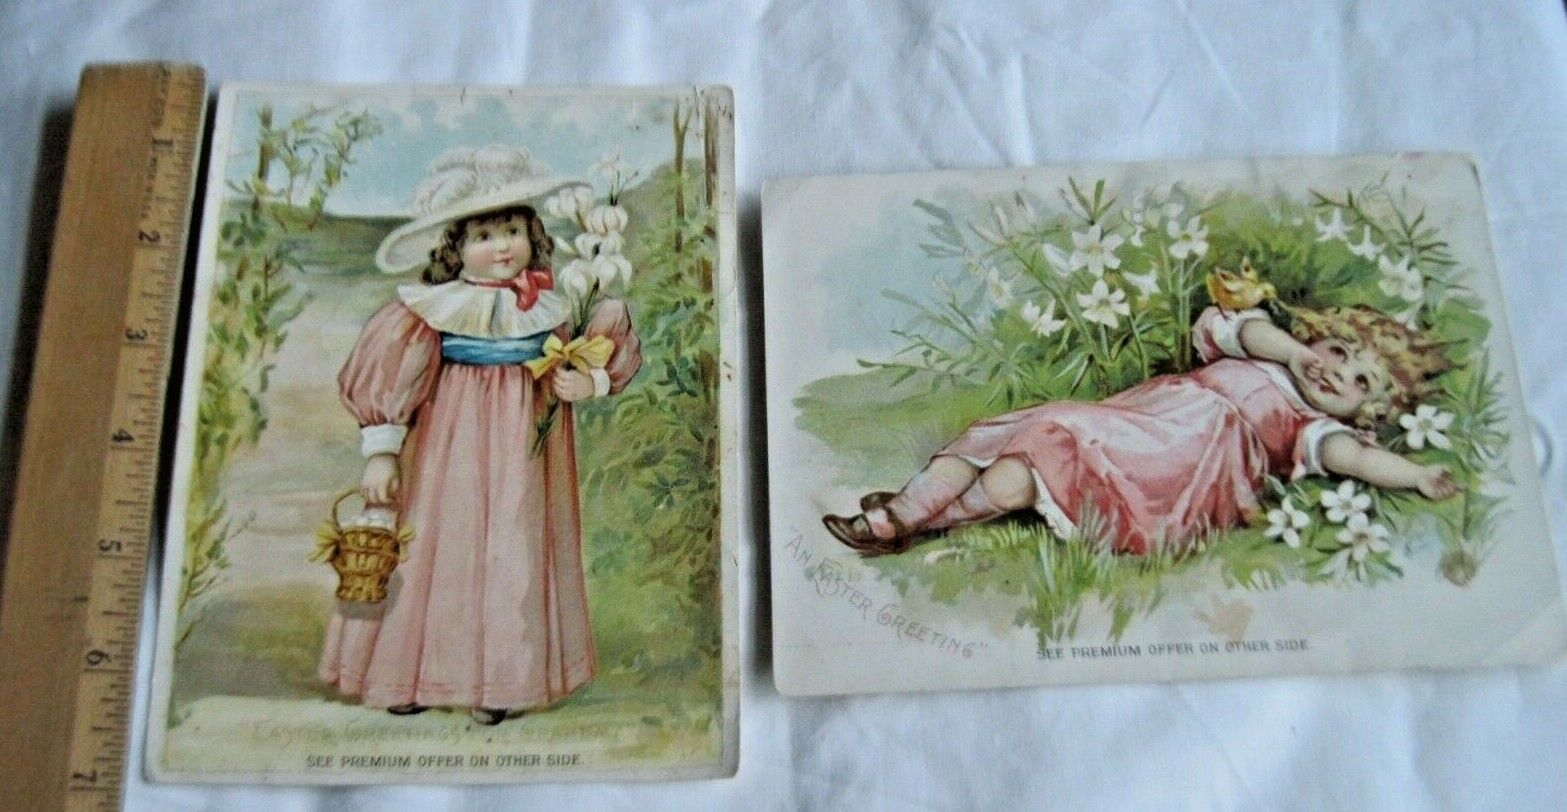 2 Antique Lion Coffee Woolson Spice Co Toledo Ohio Ad Trade Cards 1834 Lil Girls